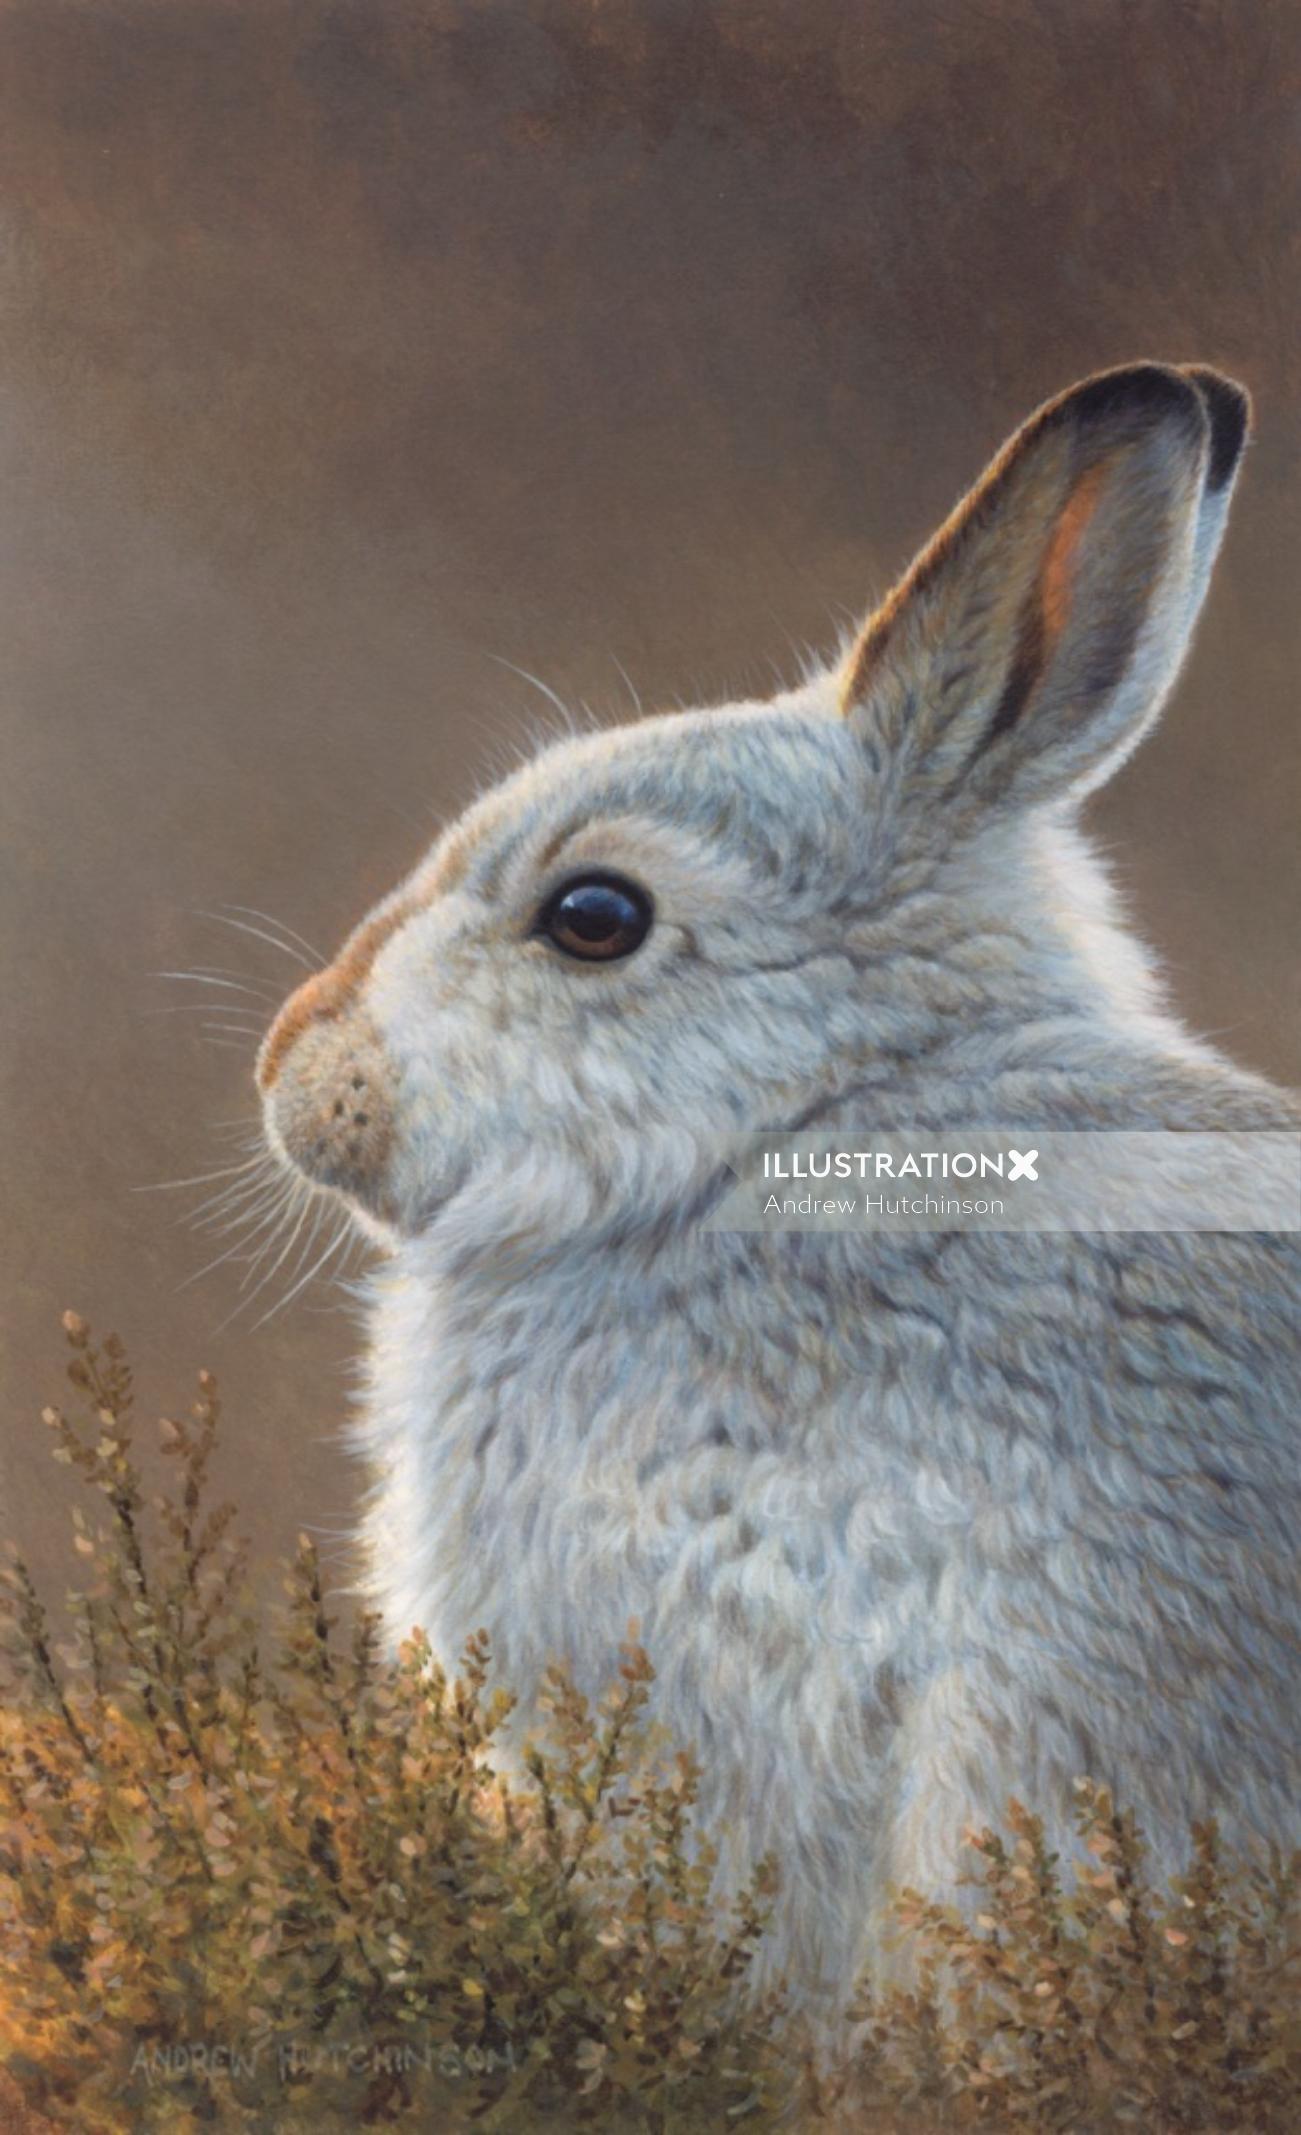 Mountain hare illustration, Wildlife images © Andrew Hutchinson